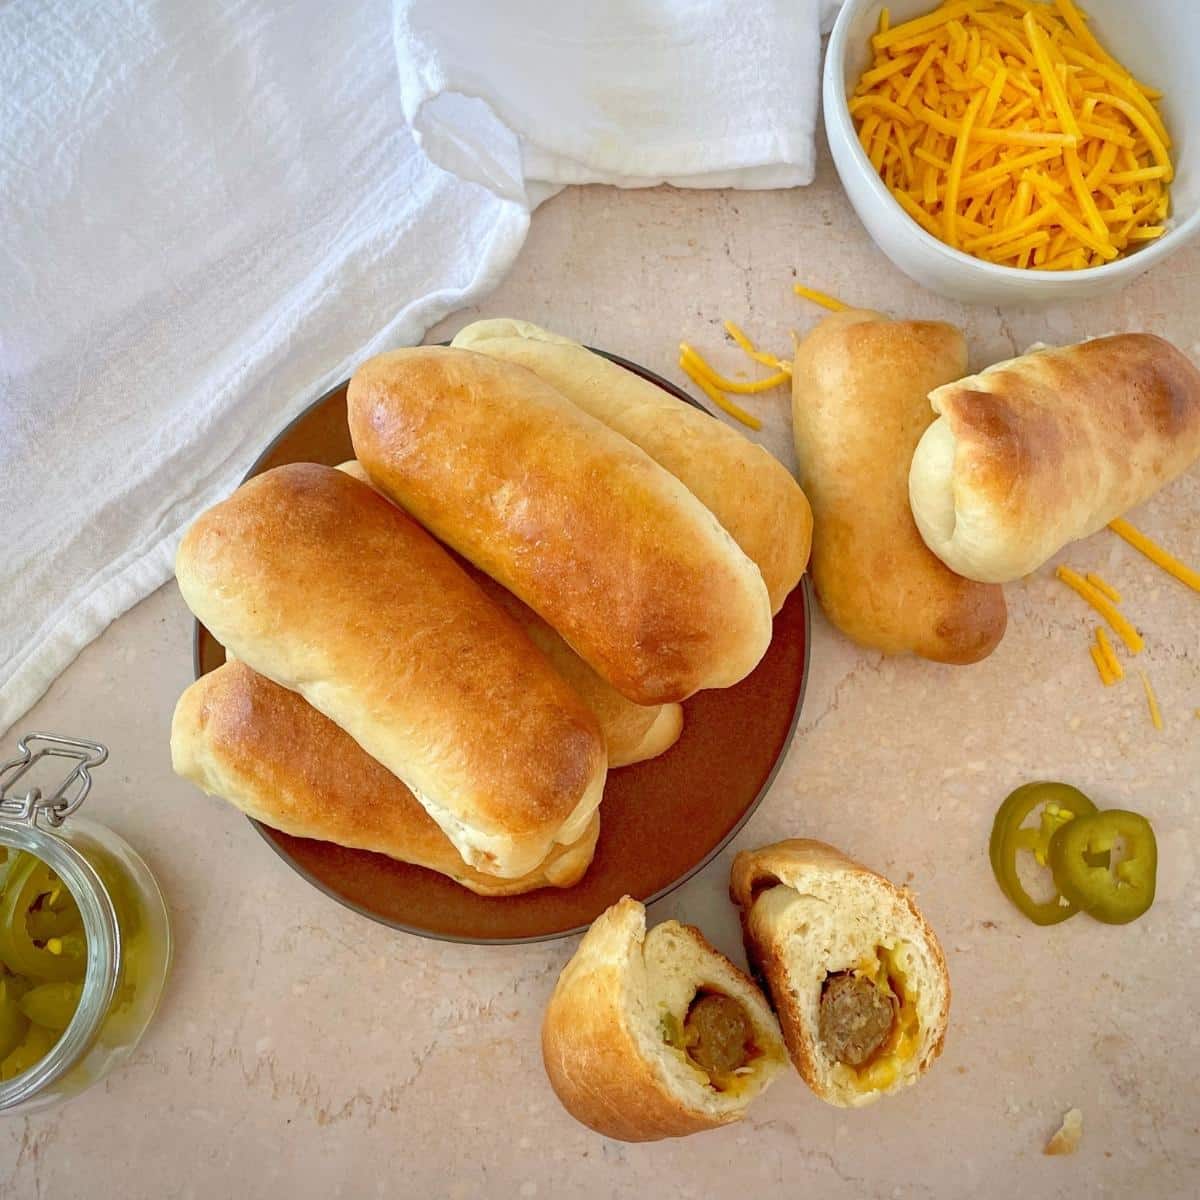 Vegan kolaches on a plate with cheese and jalapeños on the side.